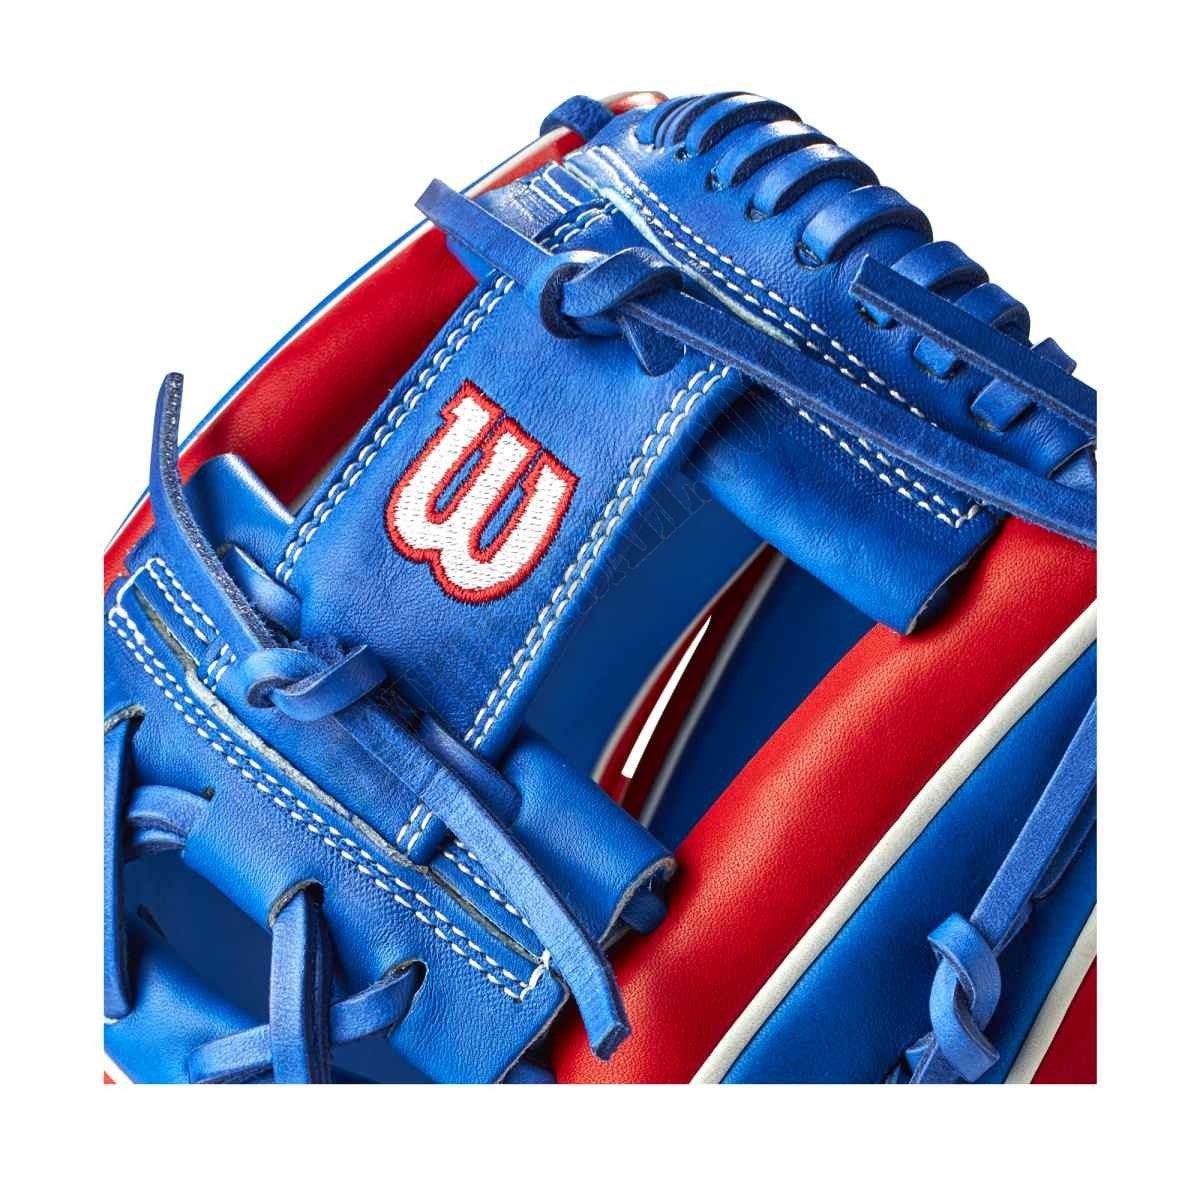 2021 A2000 1786 Dominican Republic 11.5" Infield Baseball Glove - Limited Edition ● Wilson Promotions - -5